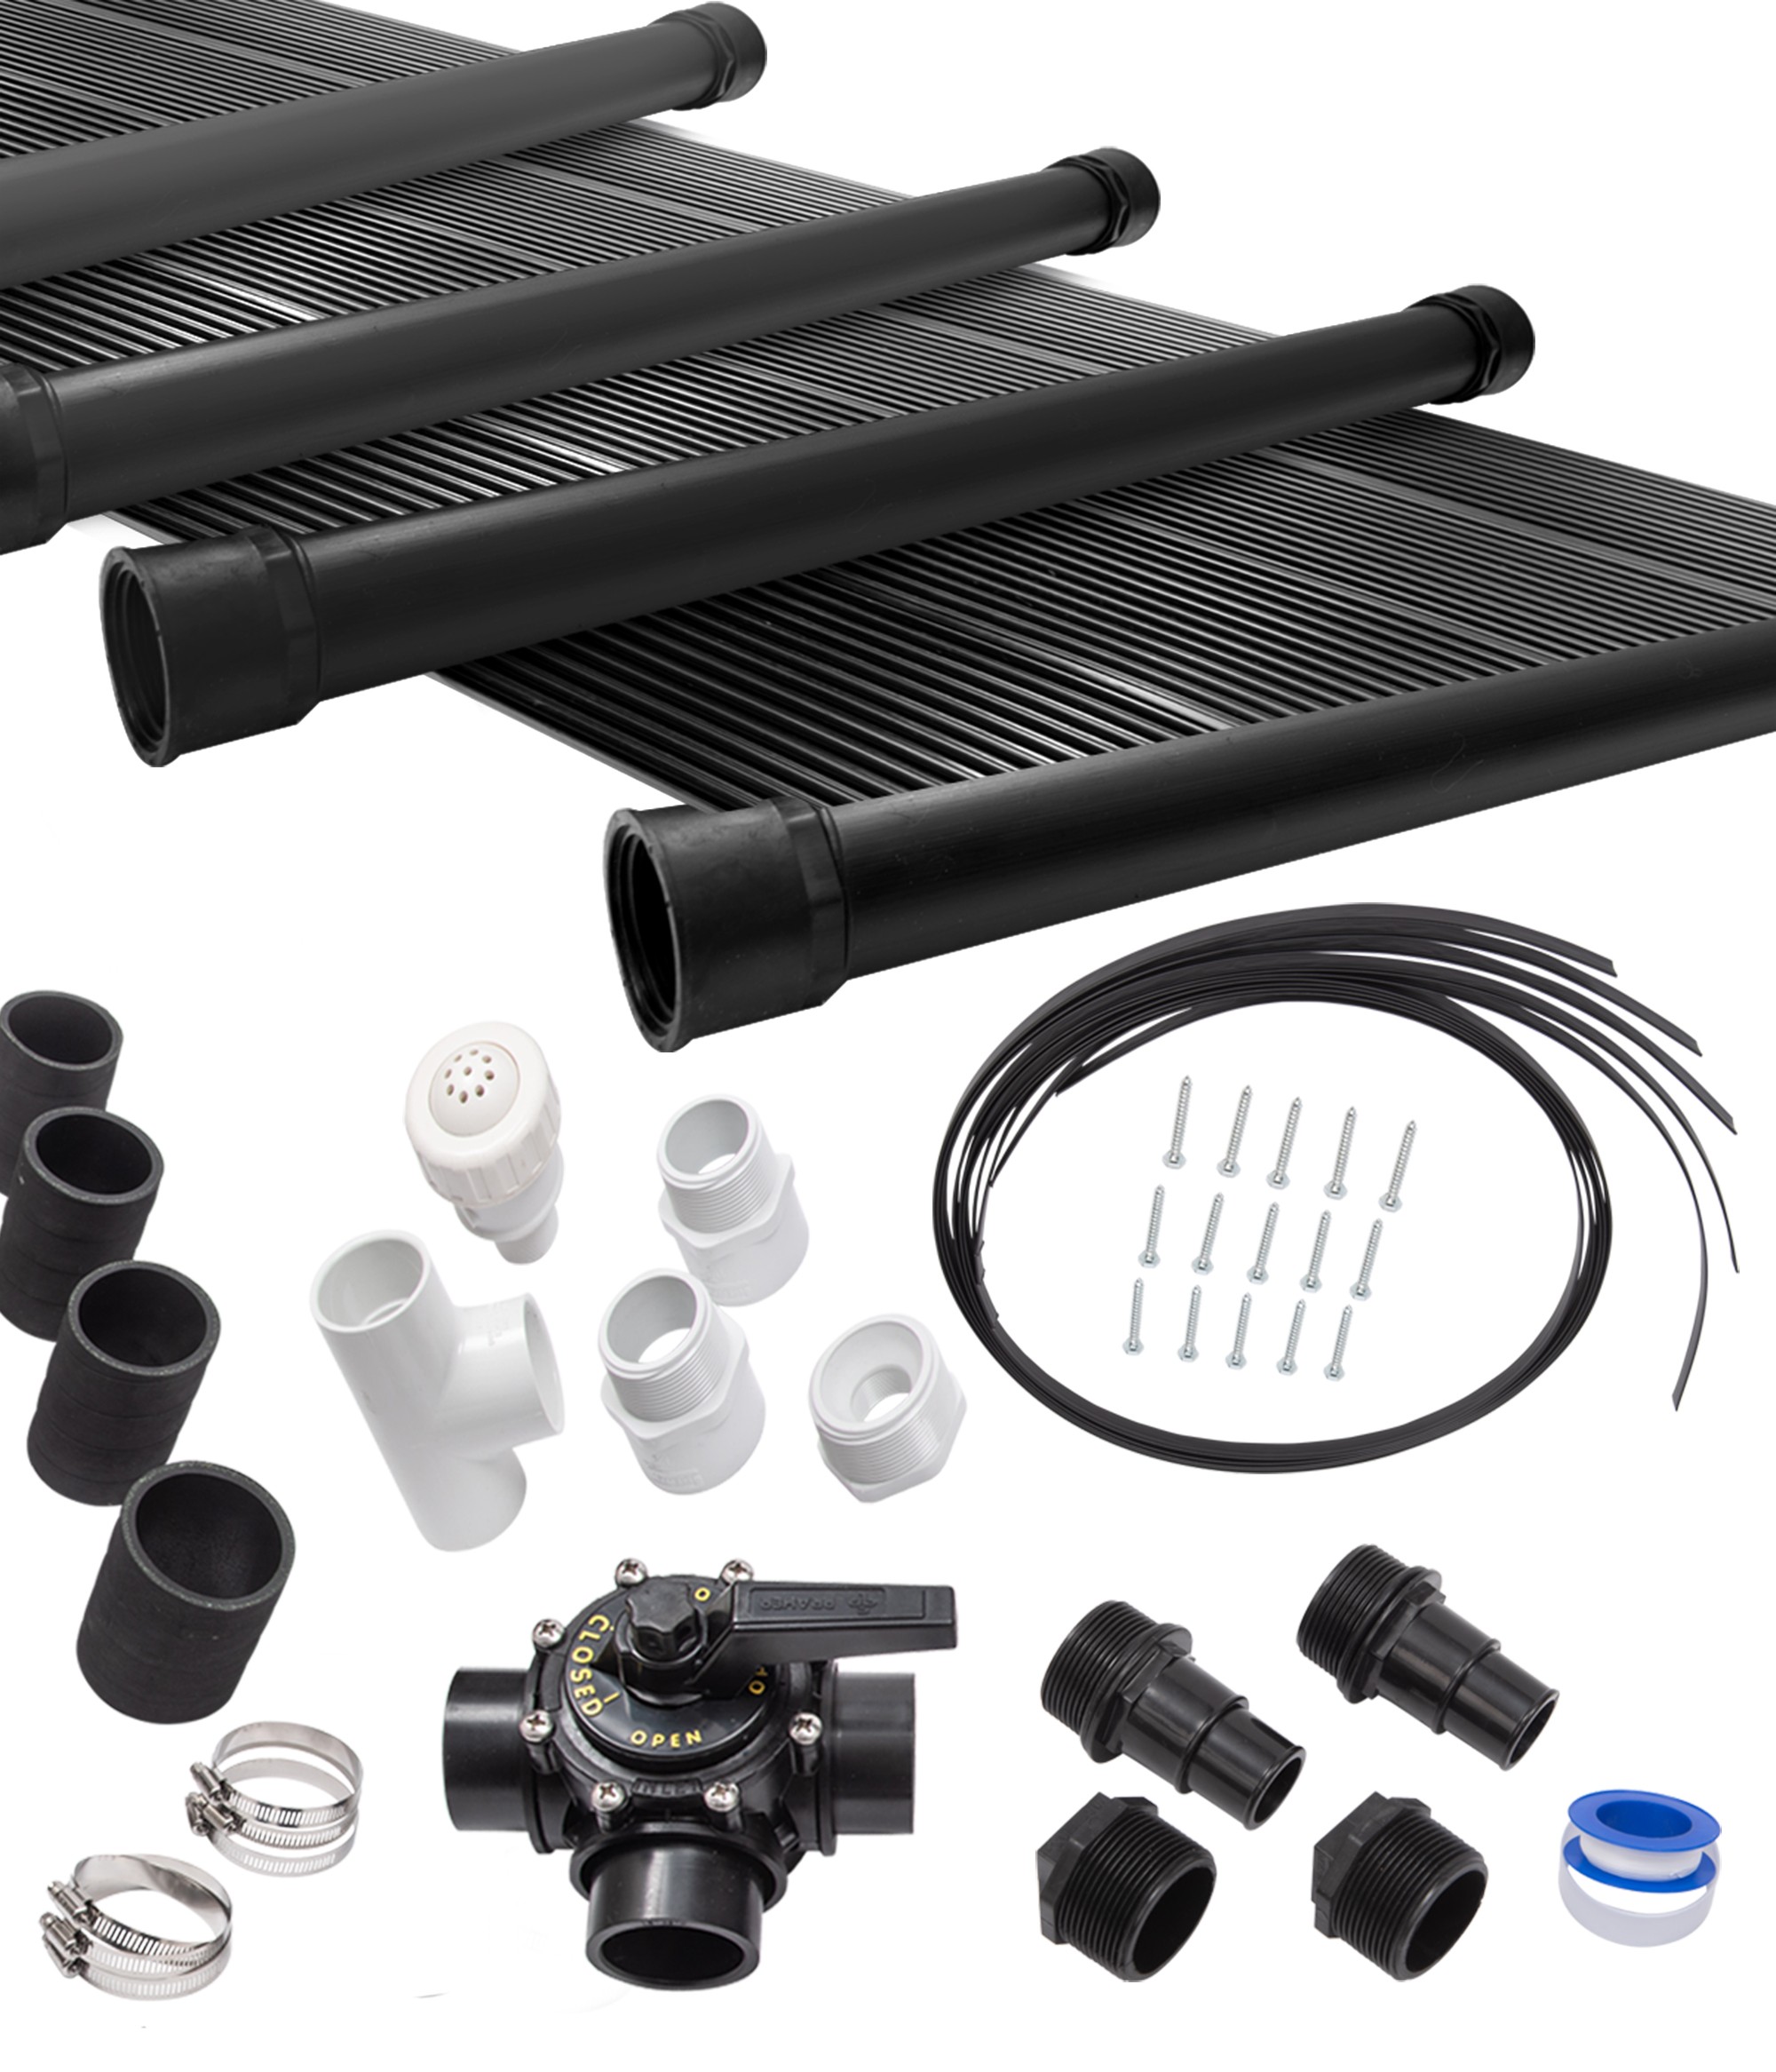 4-2X10' SunQuest Solar Swimming Pool Heater Complete System with Roof Kits